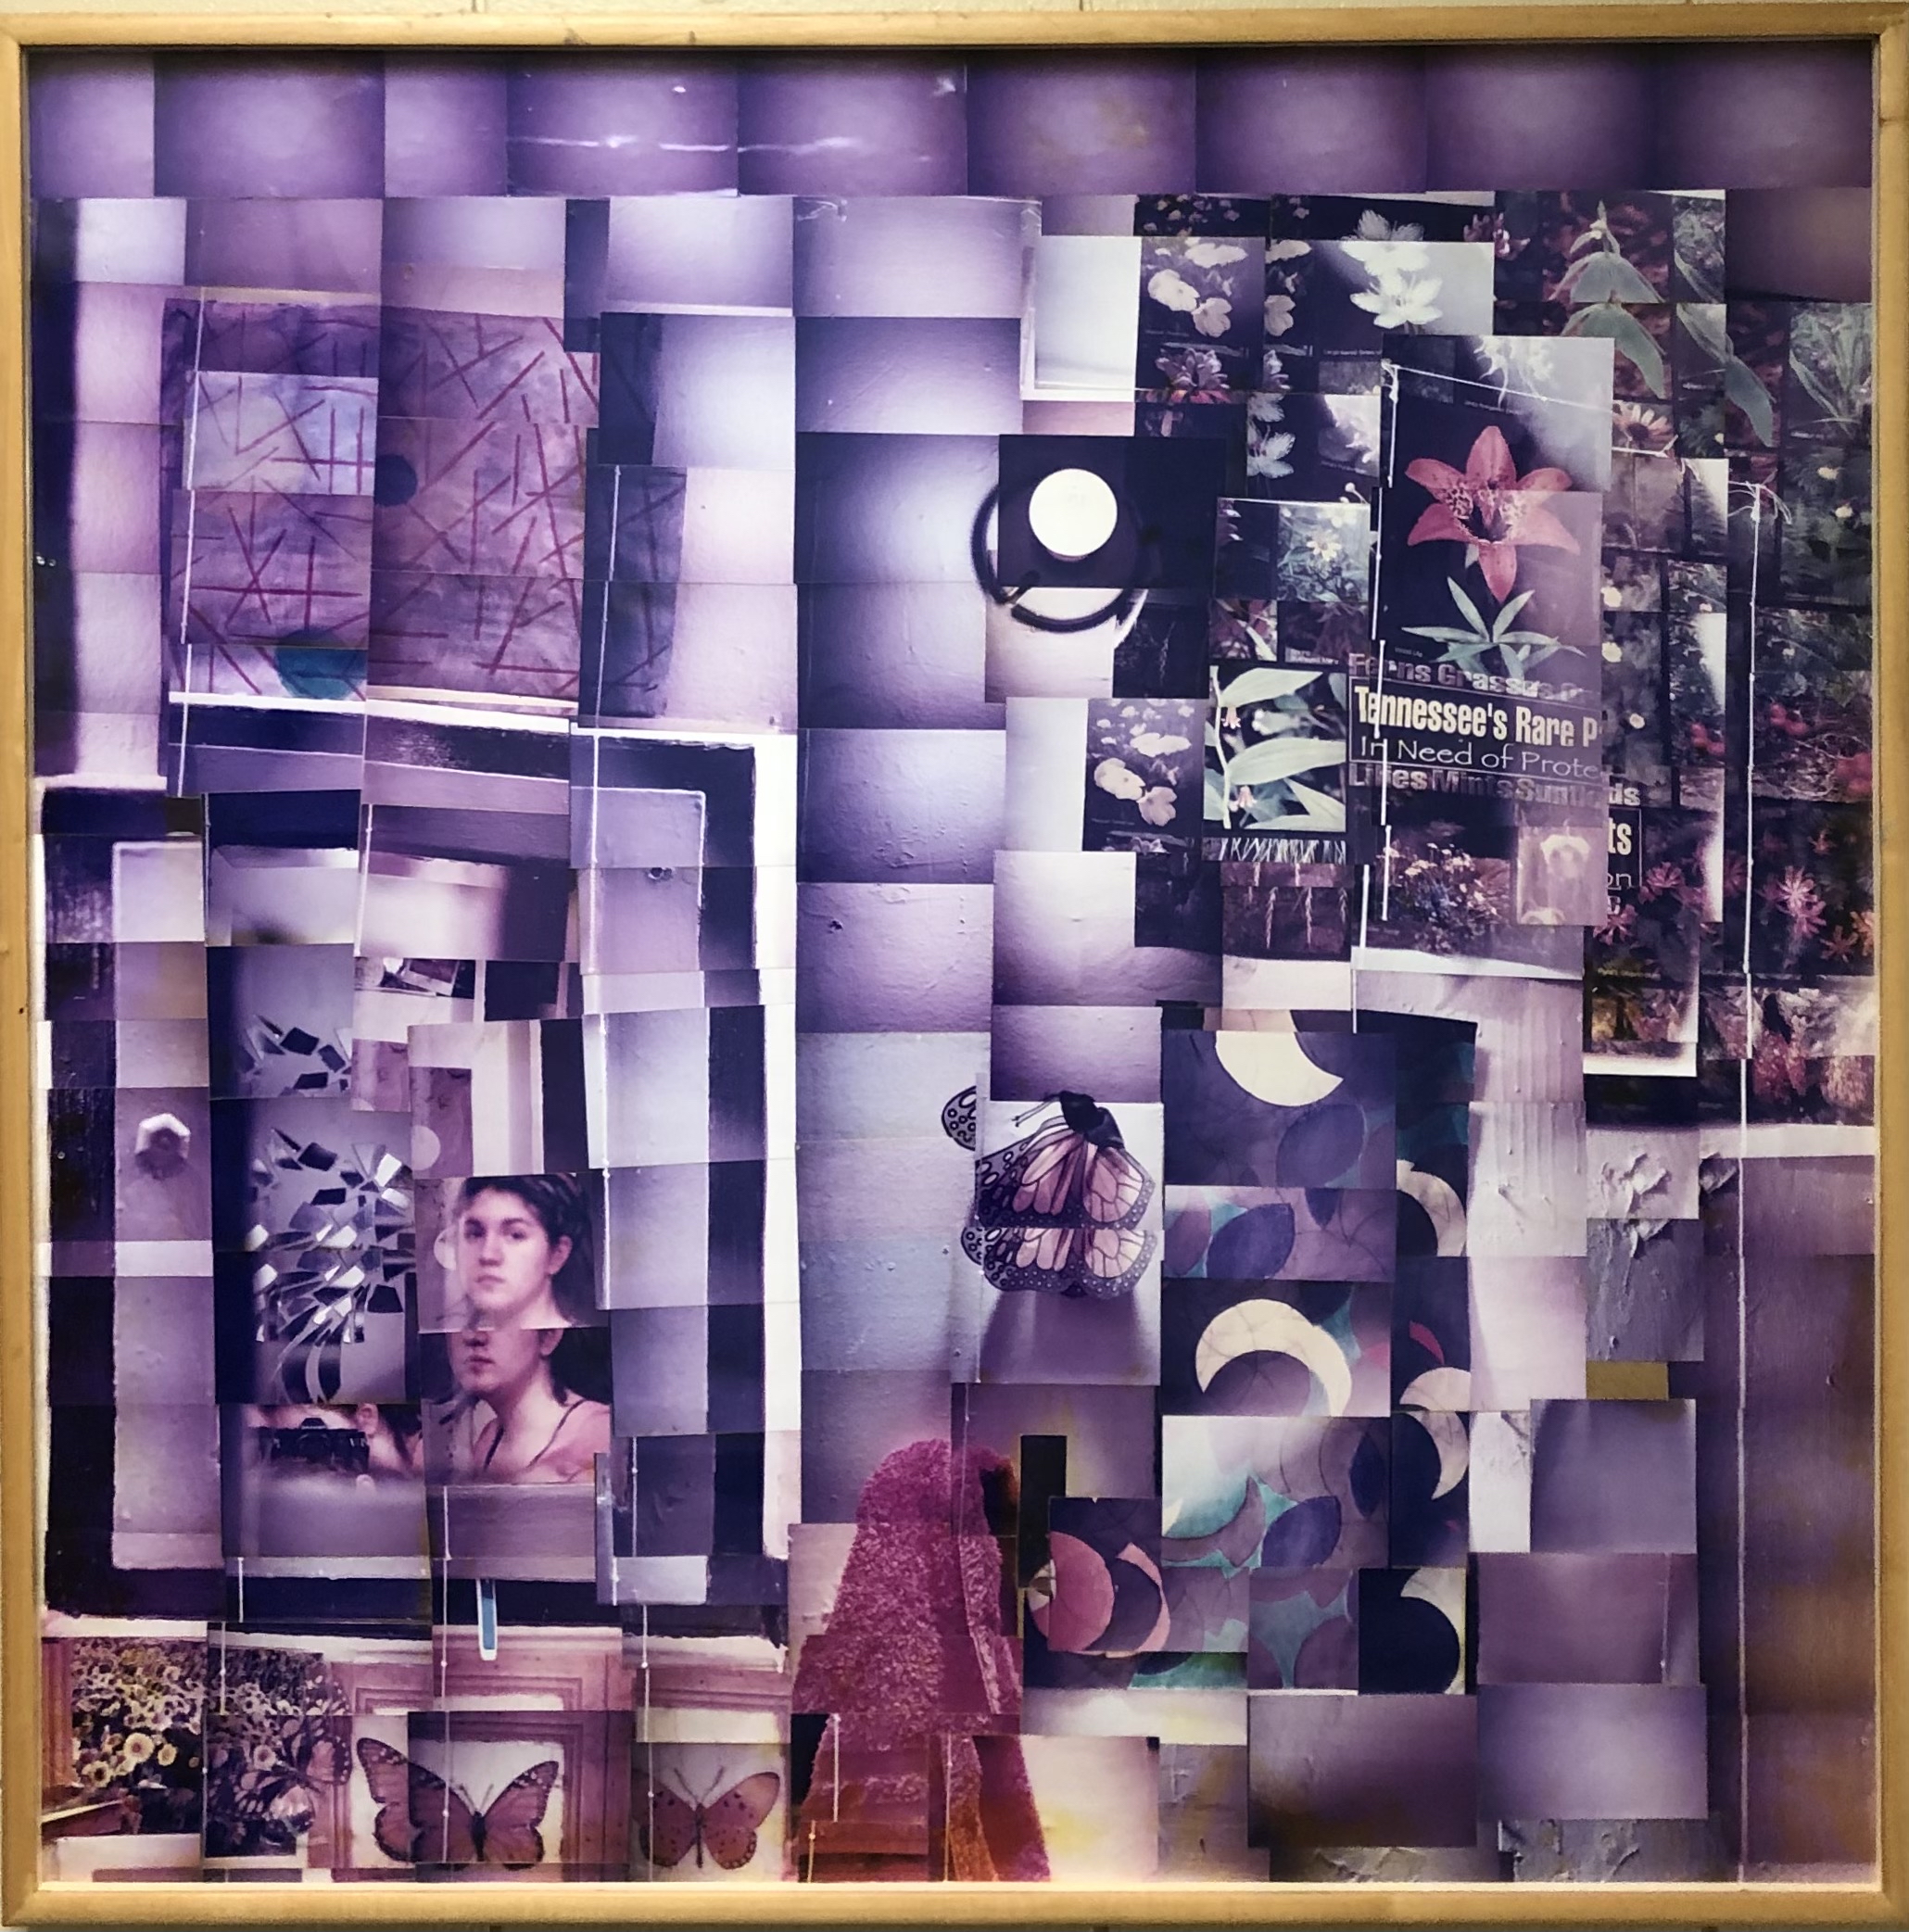 This is a collage of photos glued on masonite from an installation. The photos are mostly purple and depict parts of a bathroom, including a mirror with a figure in the lower left corner. There is also floral imagery and monarch butterflies. 